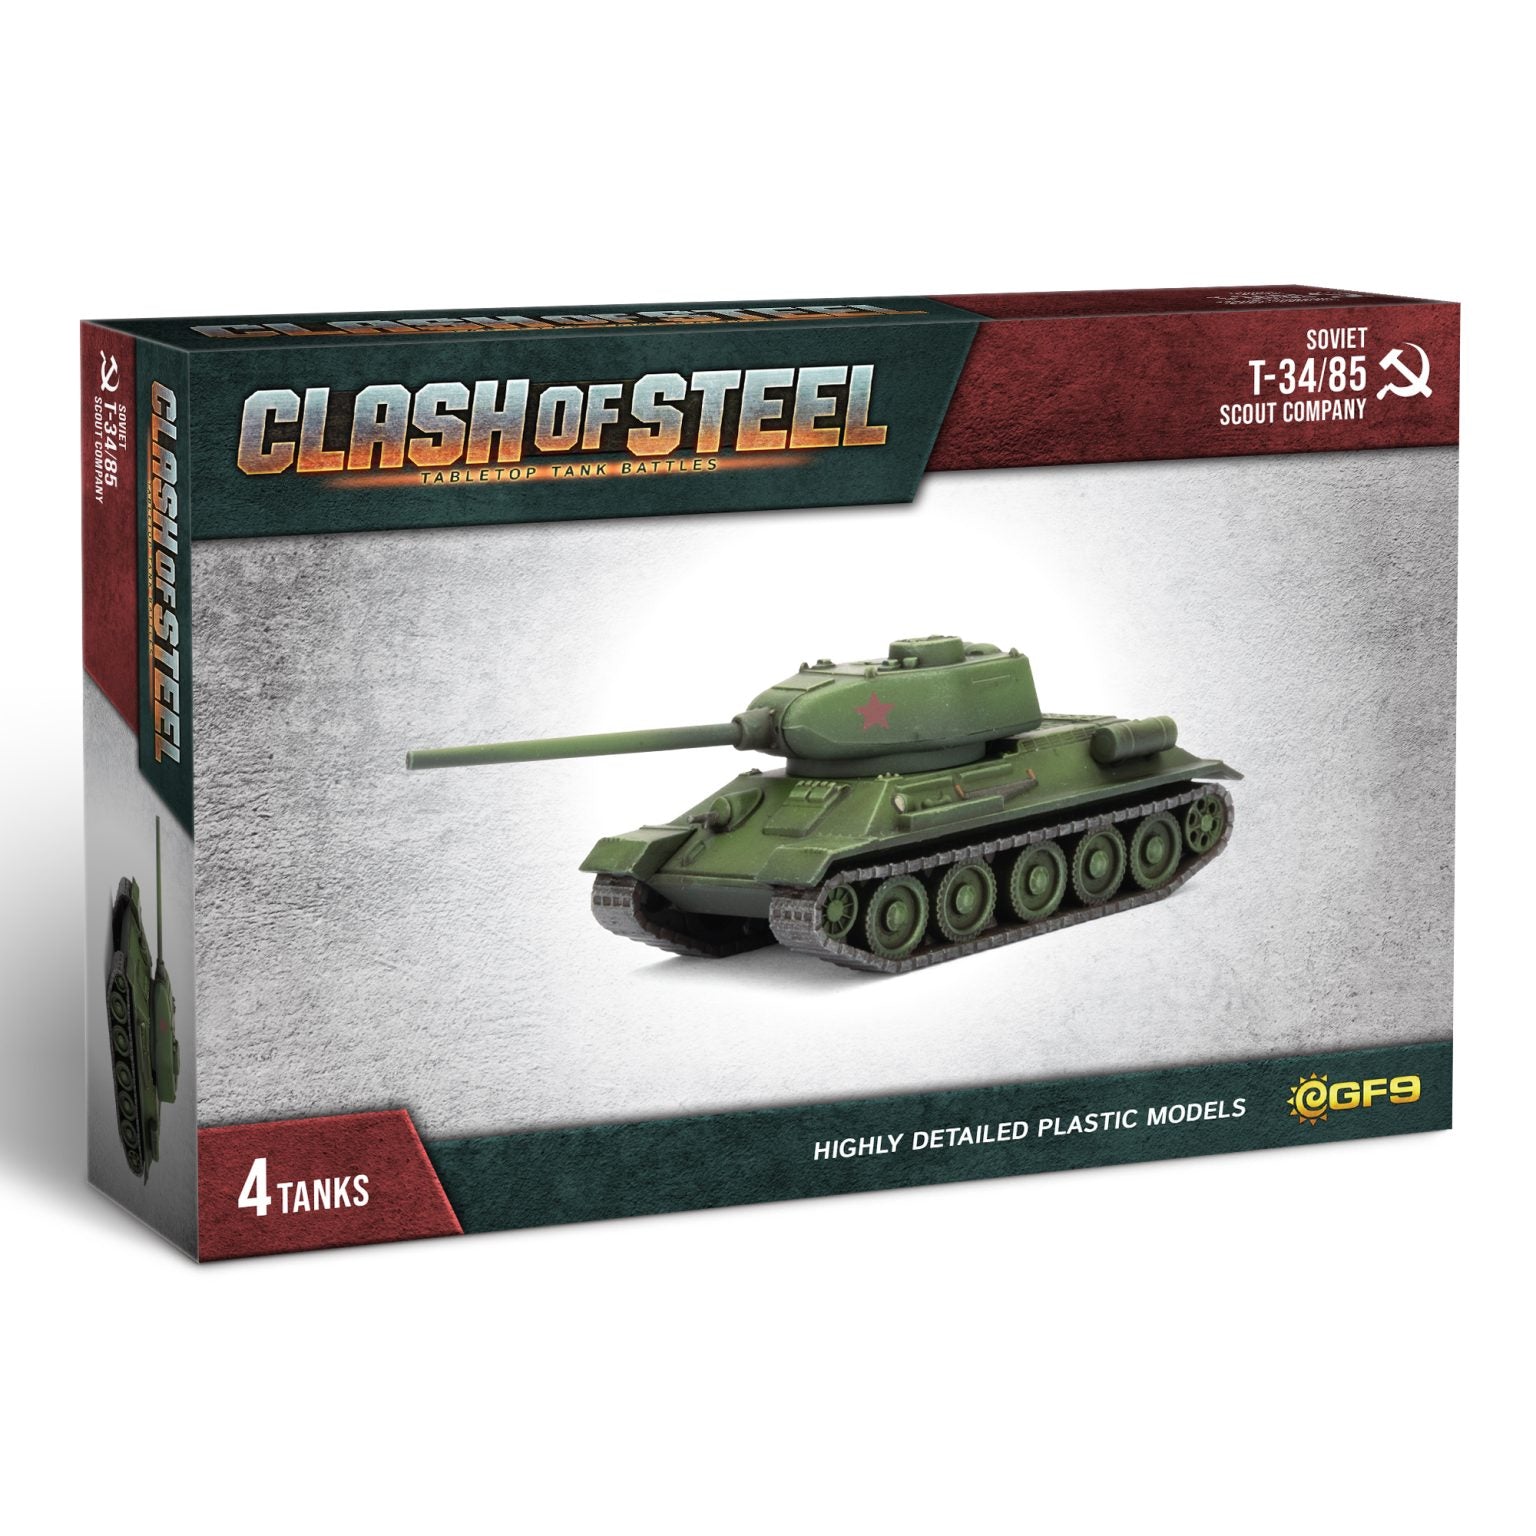 Clash of Steel: Soviet - T-34/85 Scout Company | Grognard Games